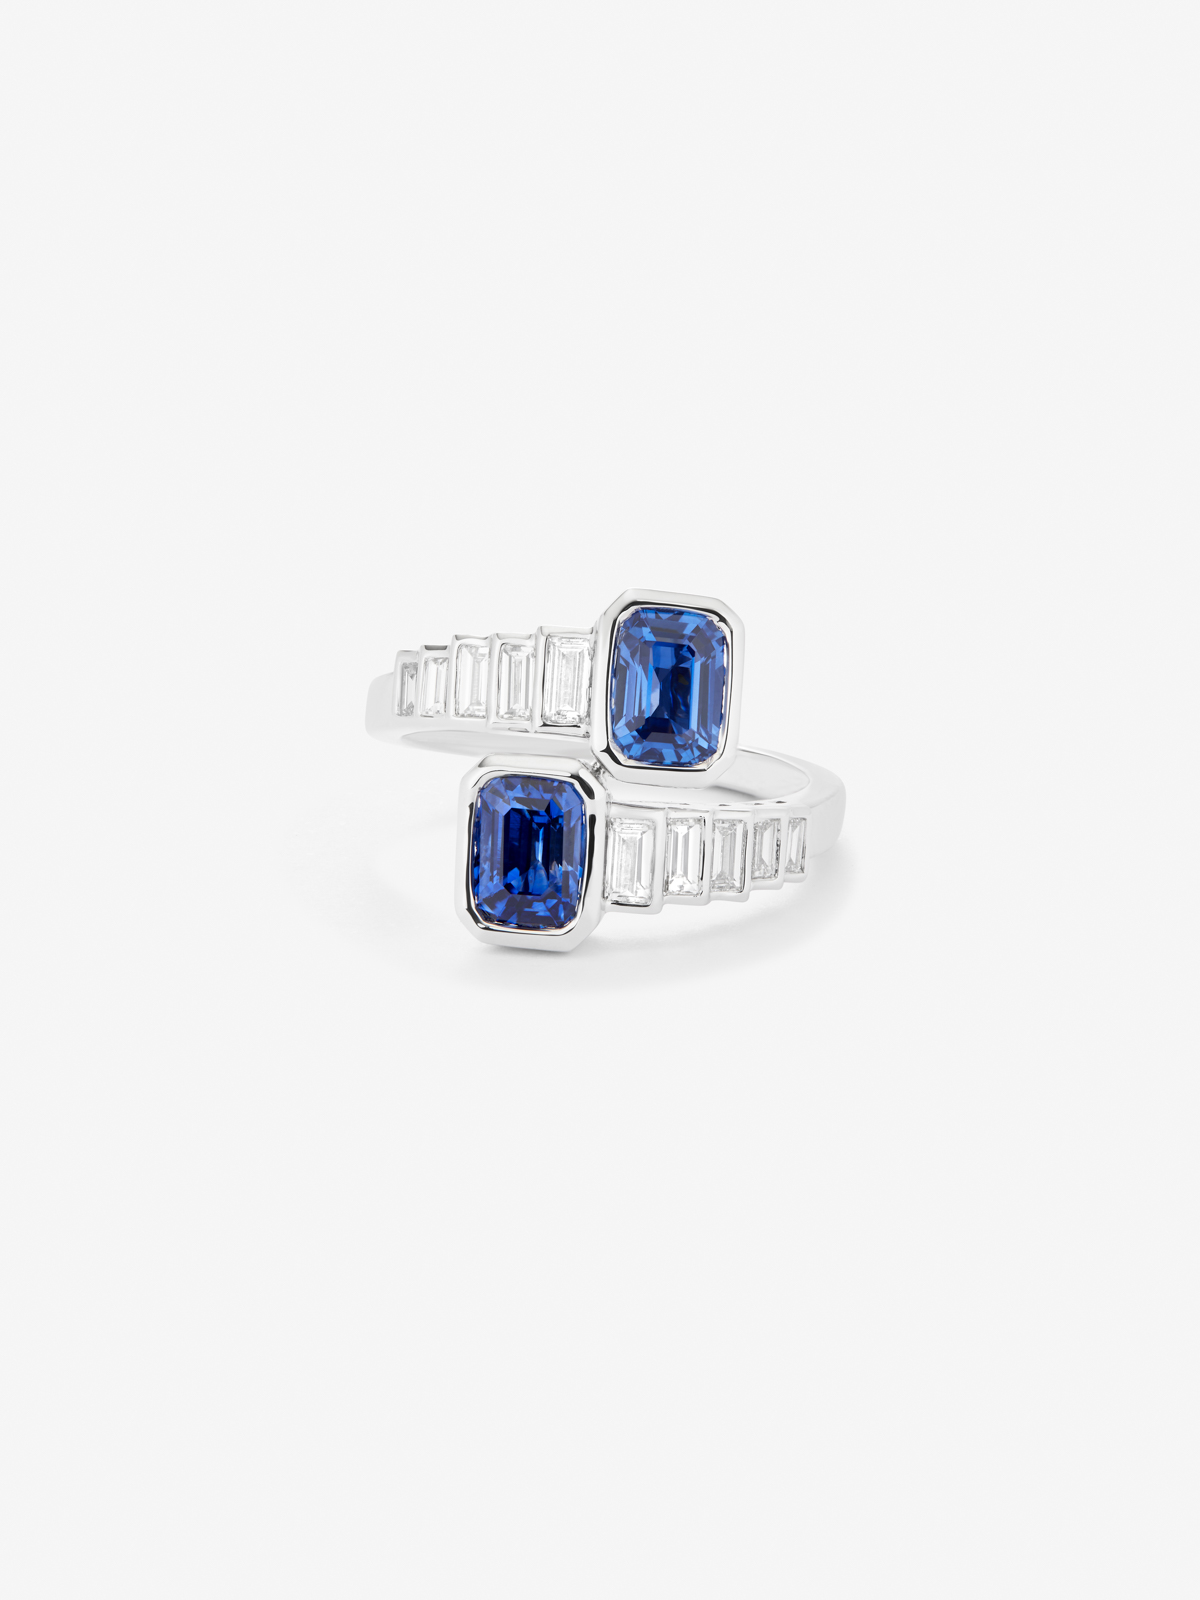 You and I 18k White Gold Ring with Blue and Blue Lofiros live in octagonal size of 2.2 cts and white diamonds in 0.52 cts baggos